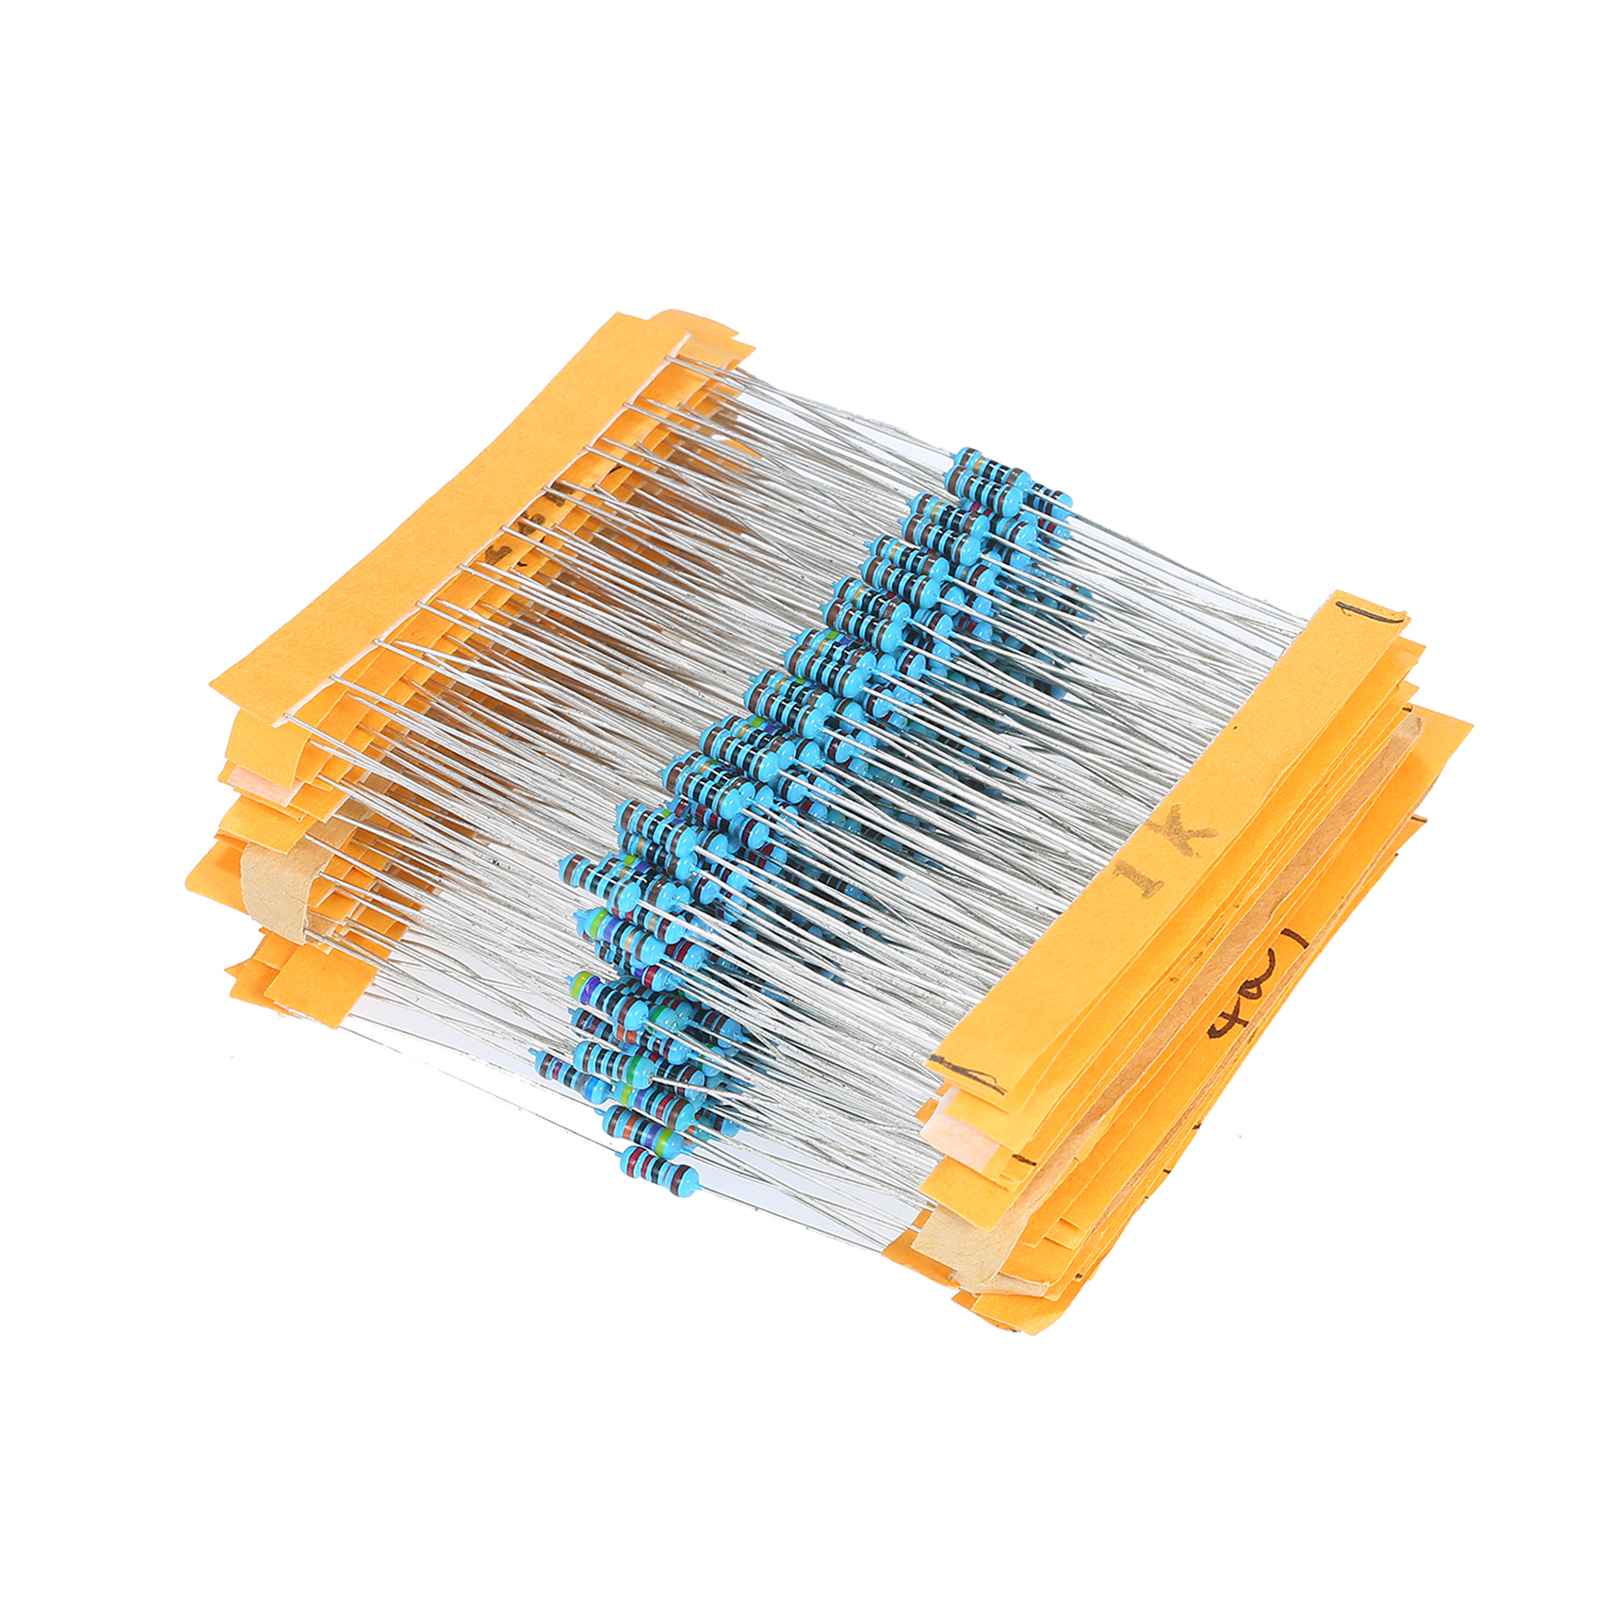 300PCS 1/4W Chromatic Ring Resistor Metal Film Resistor Assortment Kit with Permissible Error ±1% 30 Resistance Values 10/22/47/100/150/200/220/270/330/470/510/680 ohm 1/2/2.2/3.3/4.7/5.1/6.8/10/20/4 - image 1 of 7